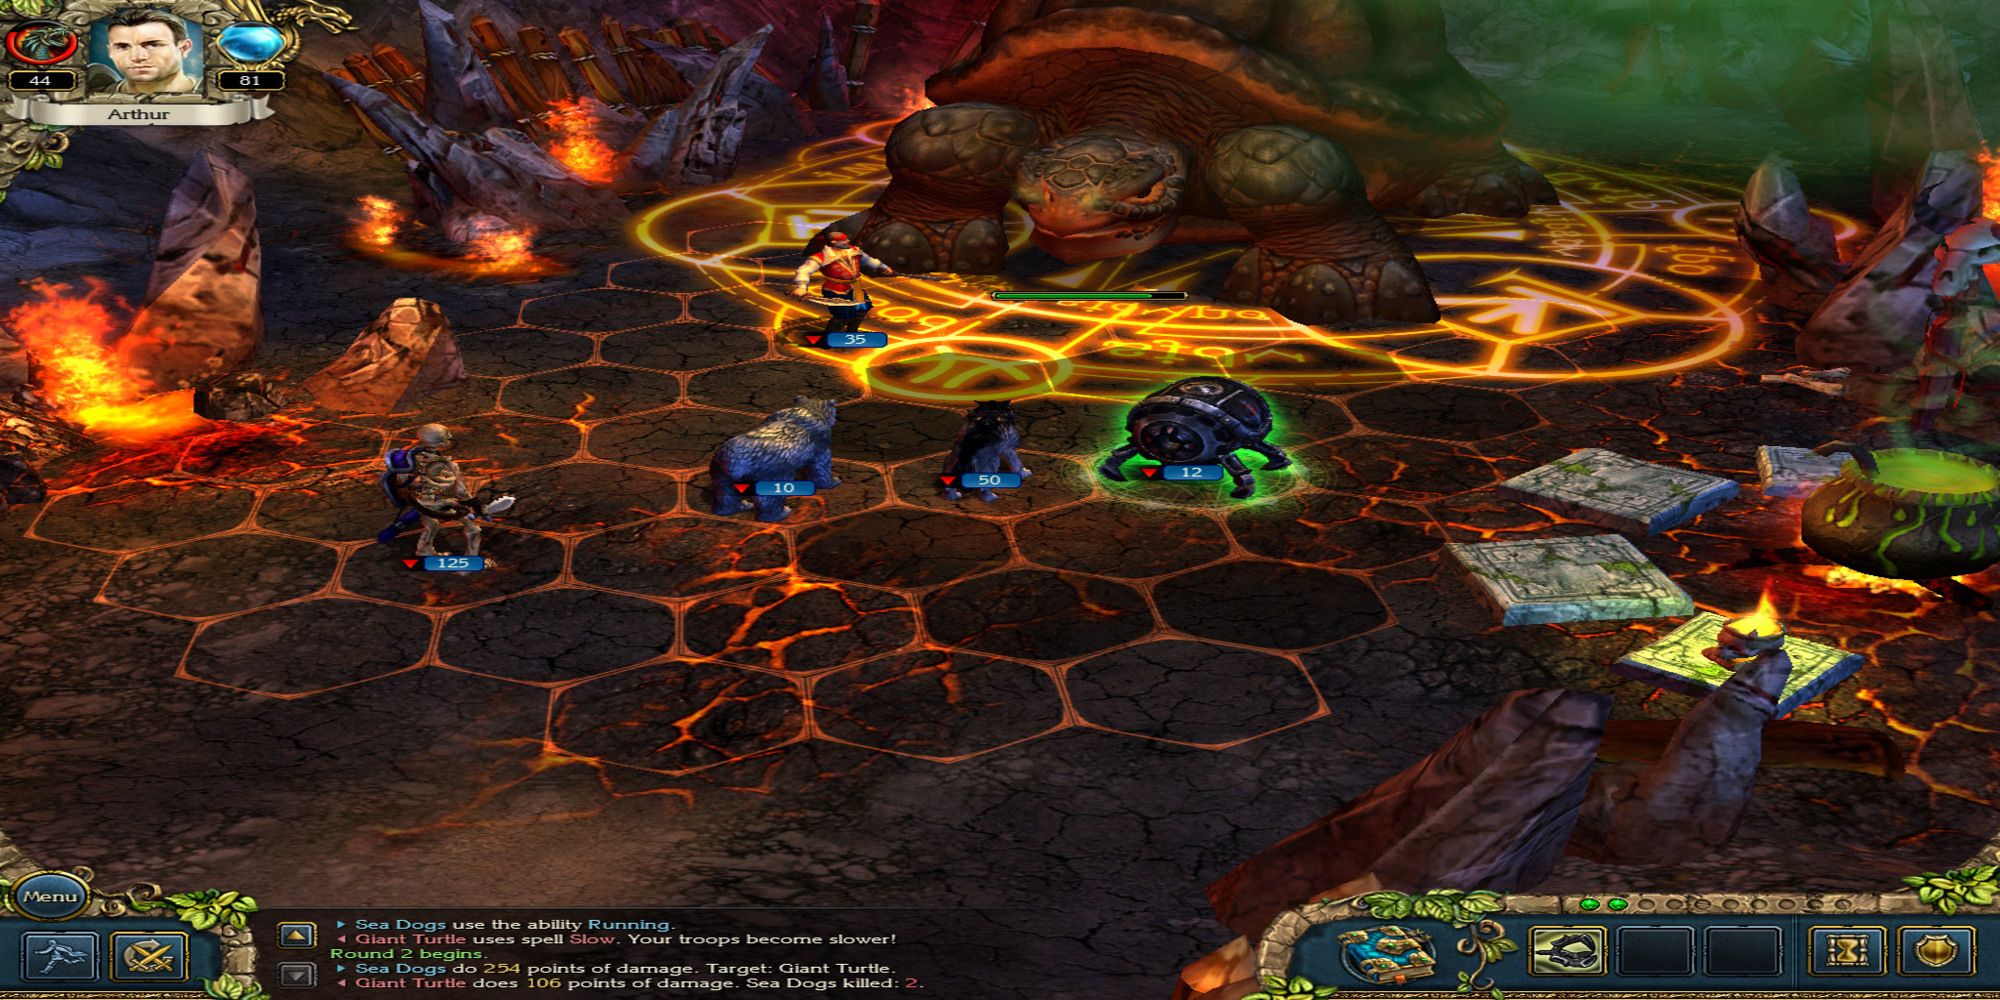 Screenshot in King's Bounty Crossworlds showing enemies and highlighted tiles